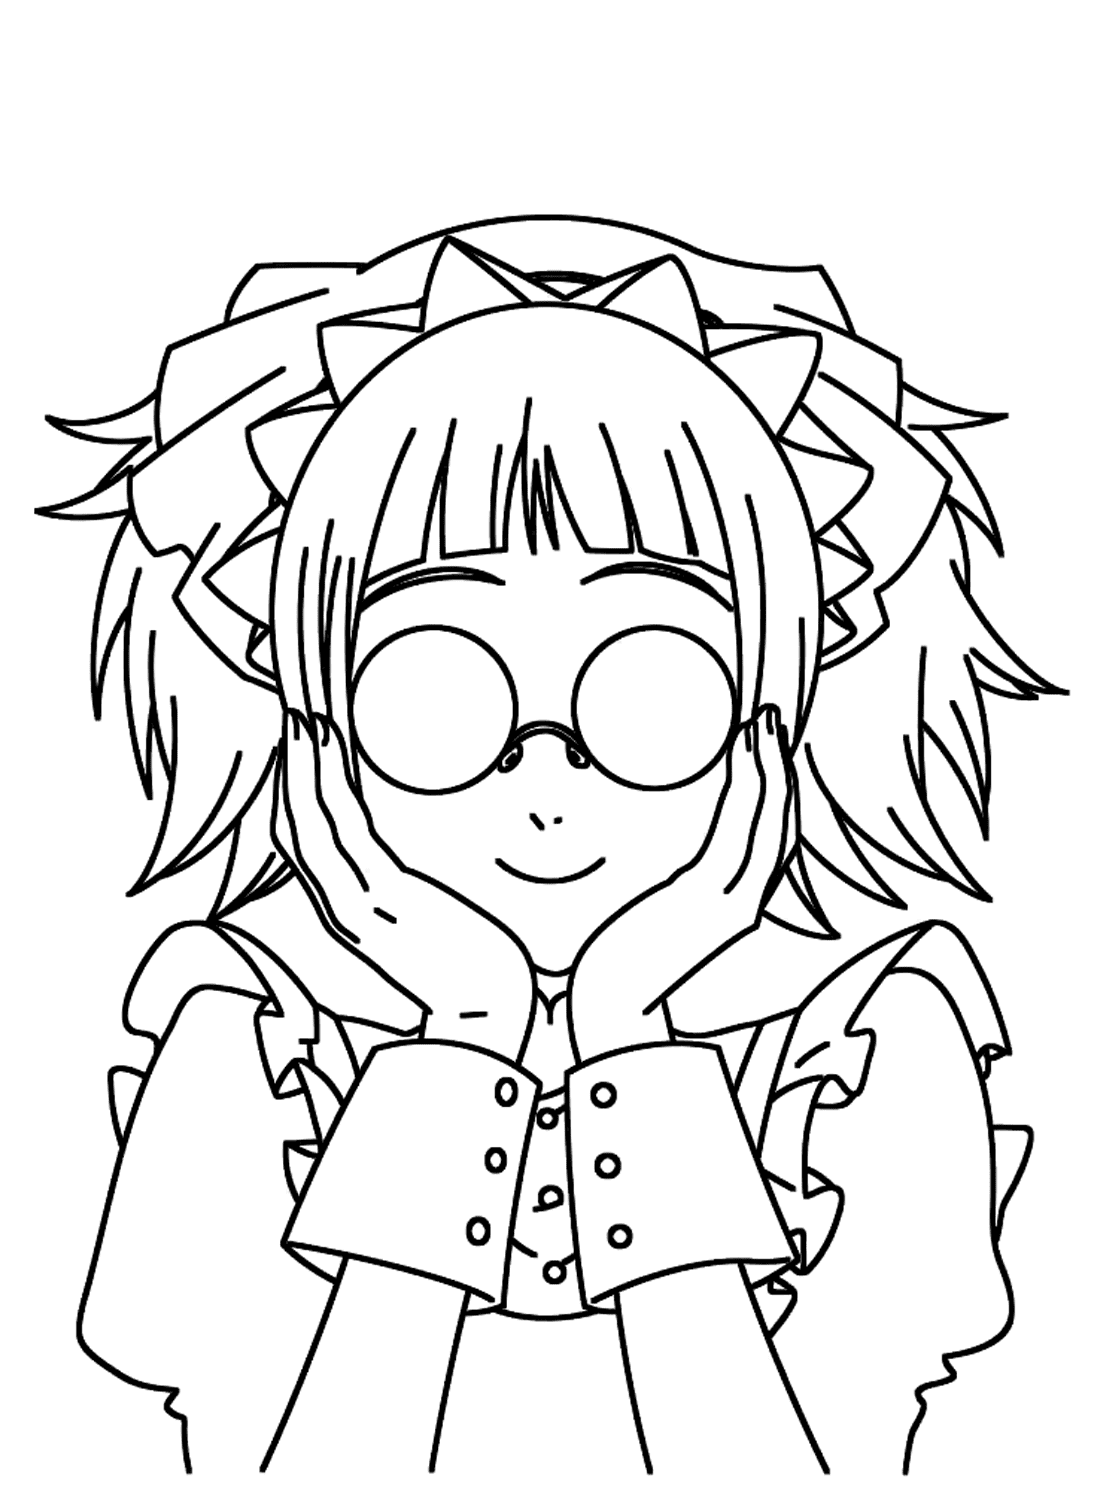 Mey Rin from Black Butler Coloring Pages